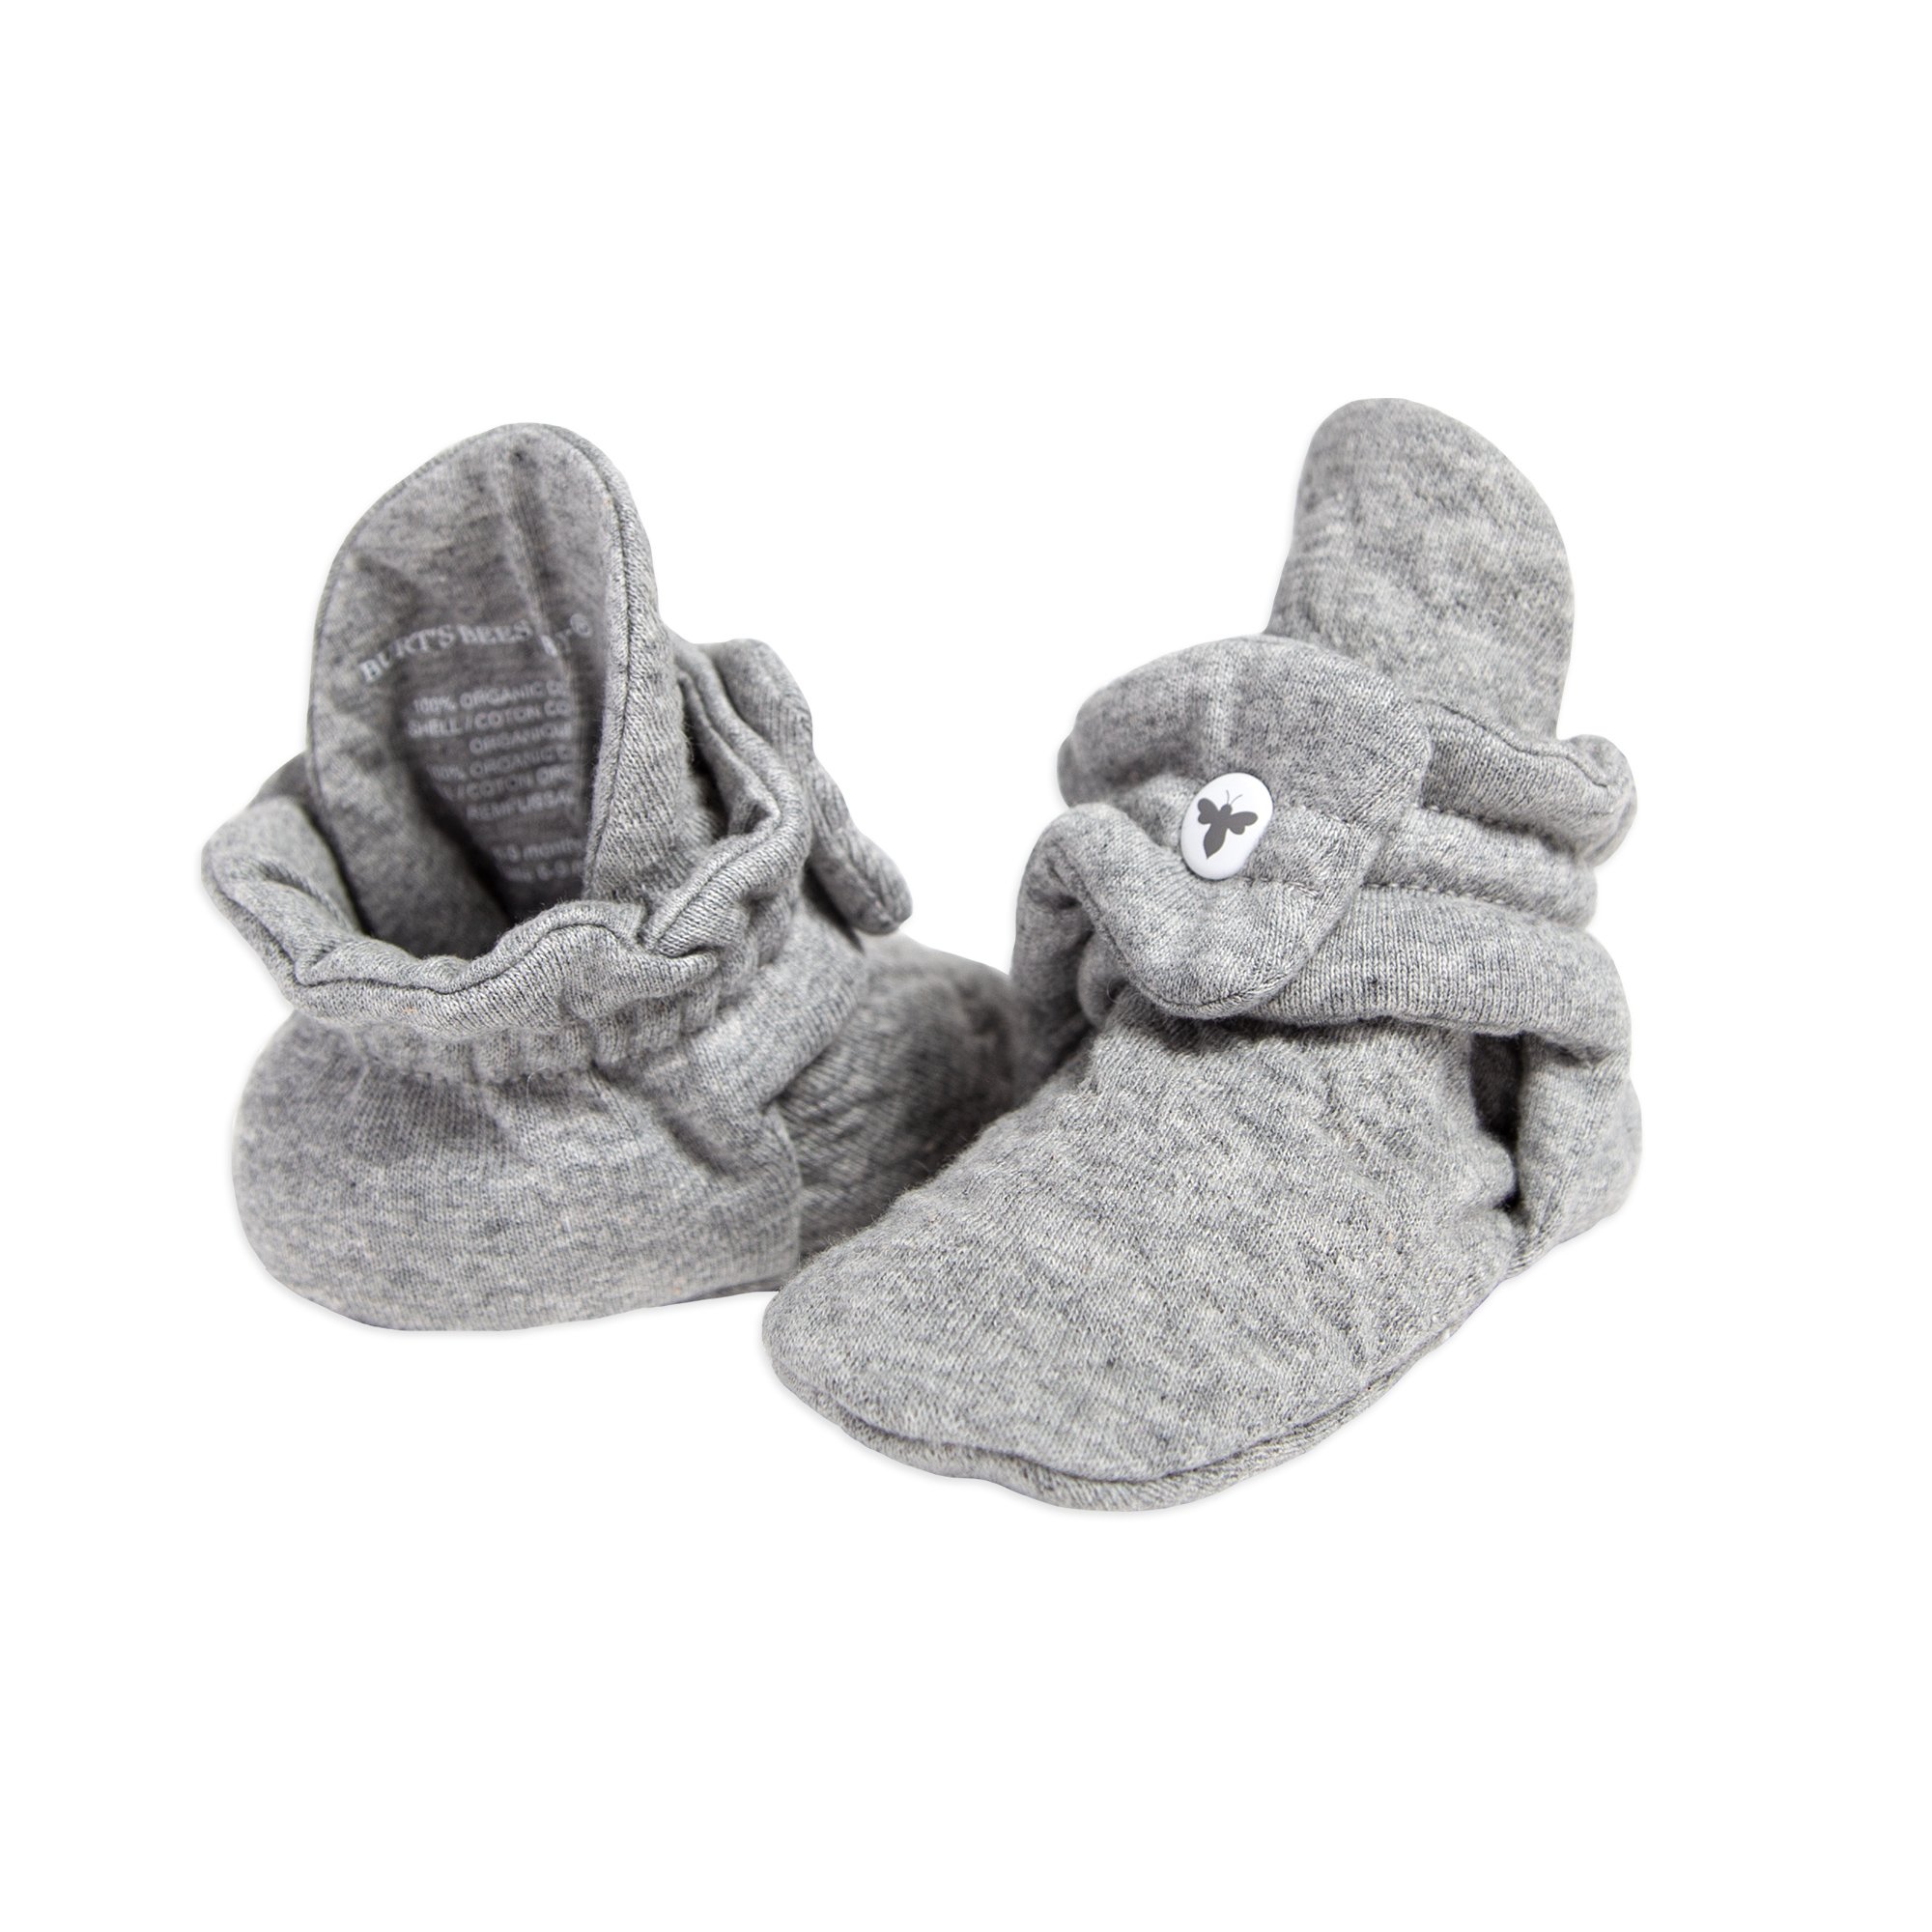 Burt\'s Bees Baby Burts Bees Baby Baby Girls Booties, Organic Cotton Adjustable Infant Shoes Slipper Sock, Heather Grey Quilted, 3-6 Months Us